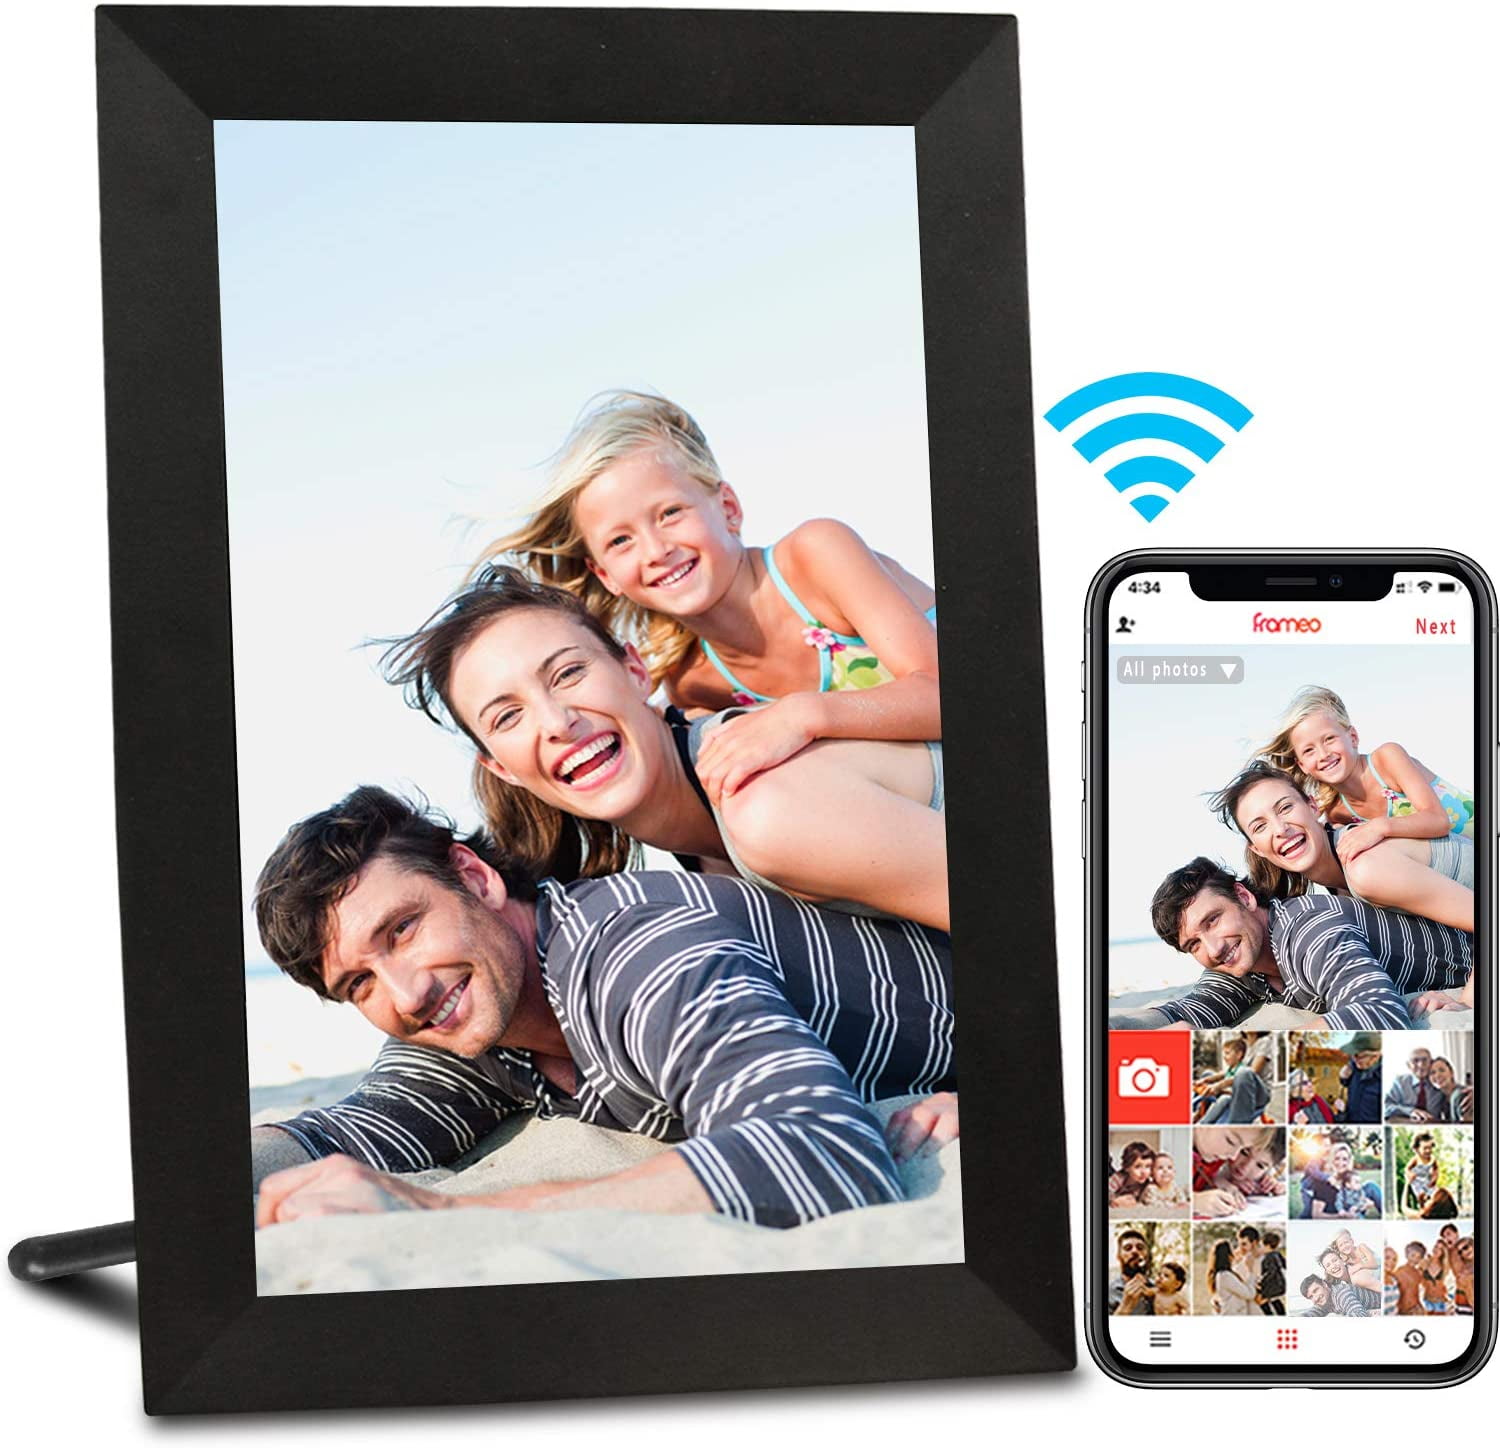 WiFi Digital Picture Frame 10.1 Inch Smart Digital Photo Frame with IPS Touch Screen HD Display Auto-Rotate,Great Gift 16GB Storage Easy Setup to Share Photos or Videos Anywhere via Free Frameo APP 